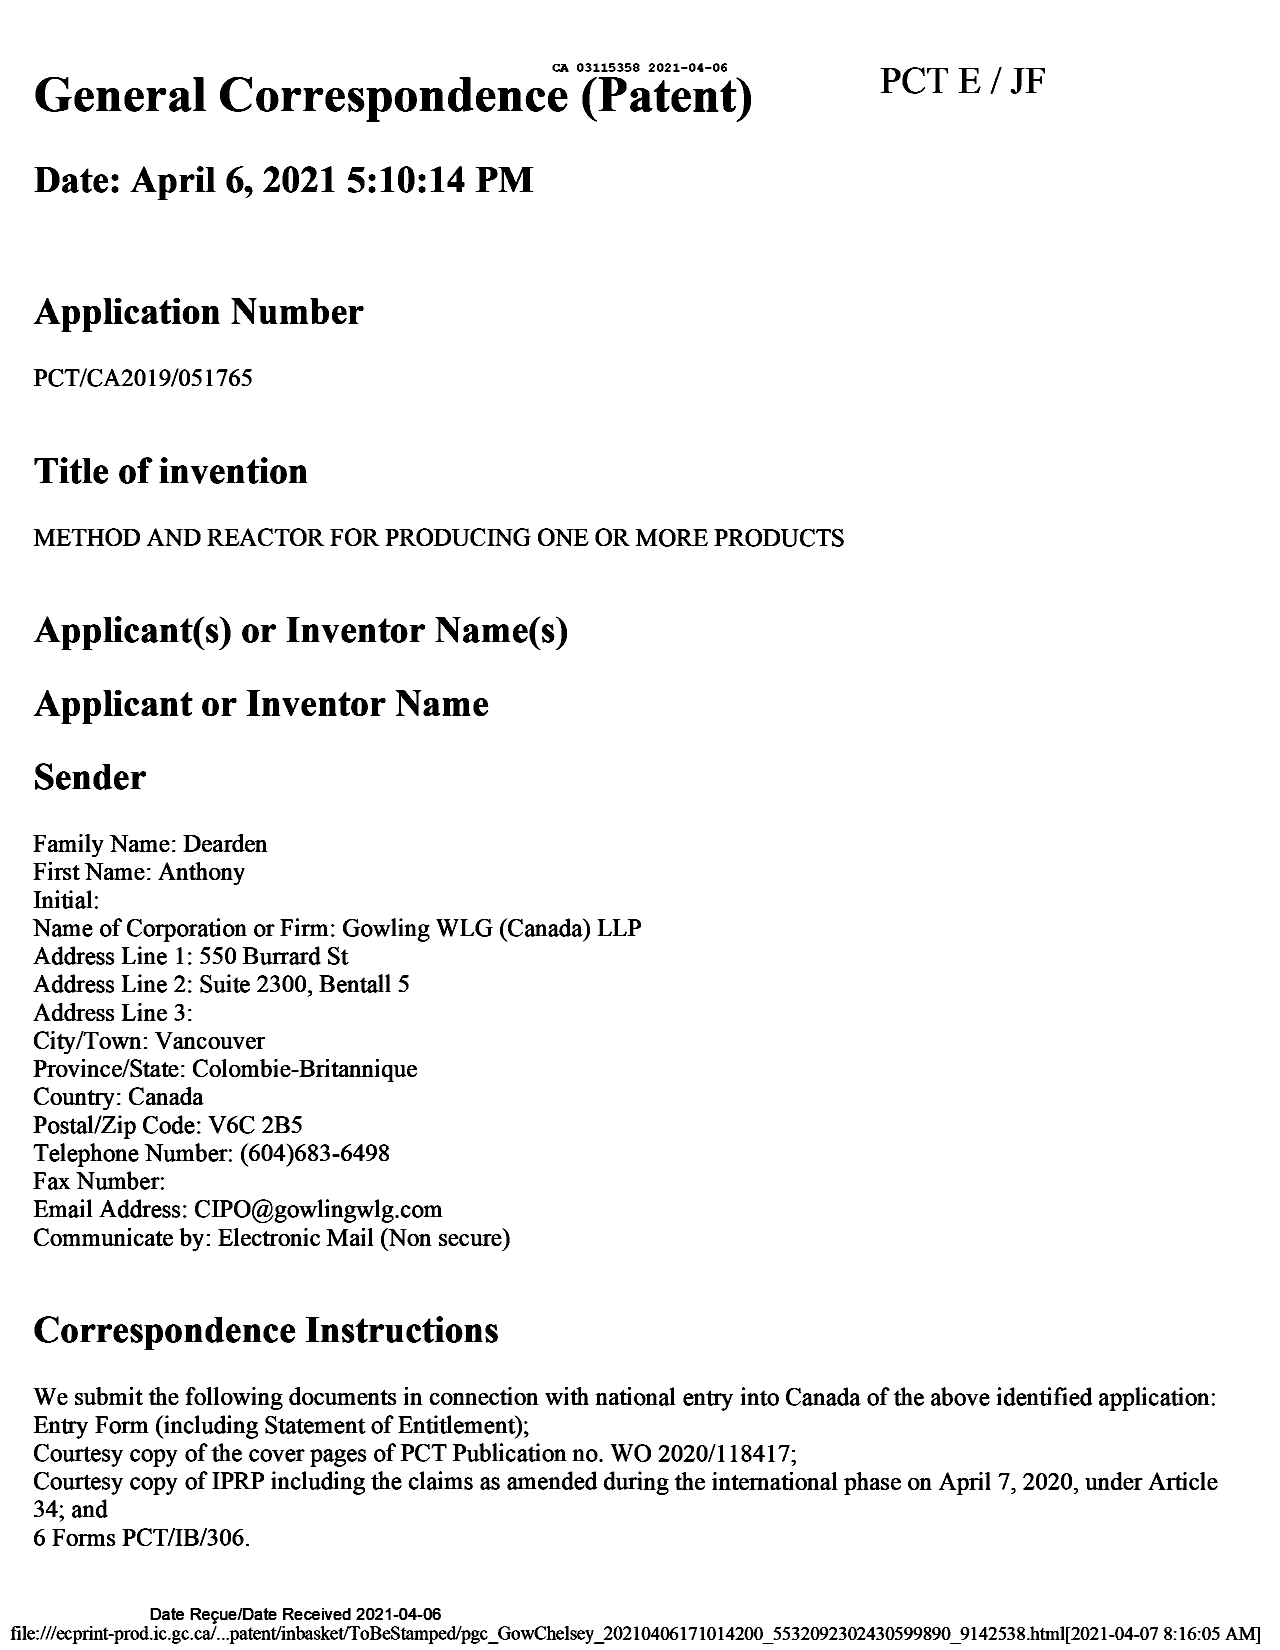 Canadian Patent Document 3115358. National Entry Request 20210406. Image 1 of 6